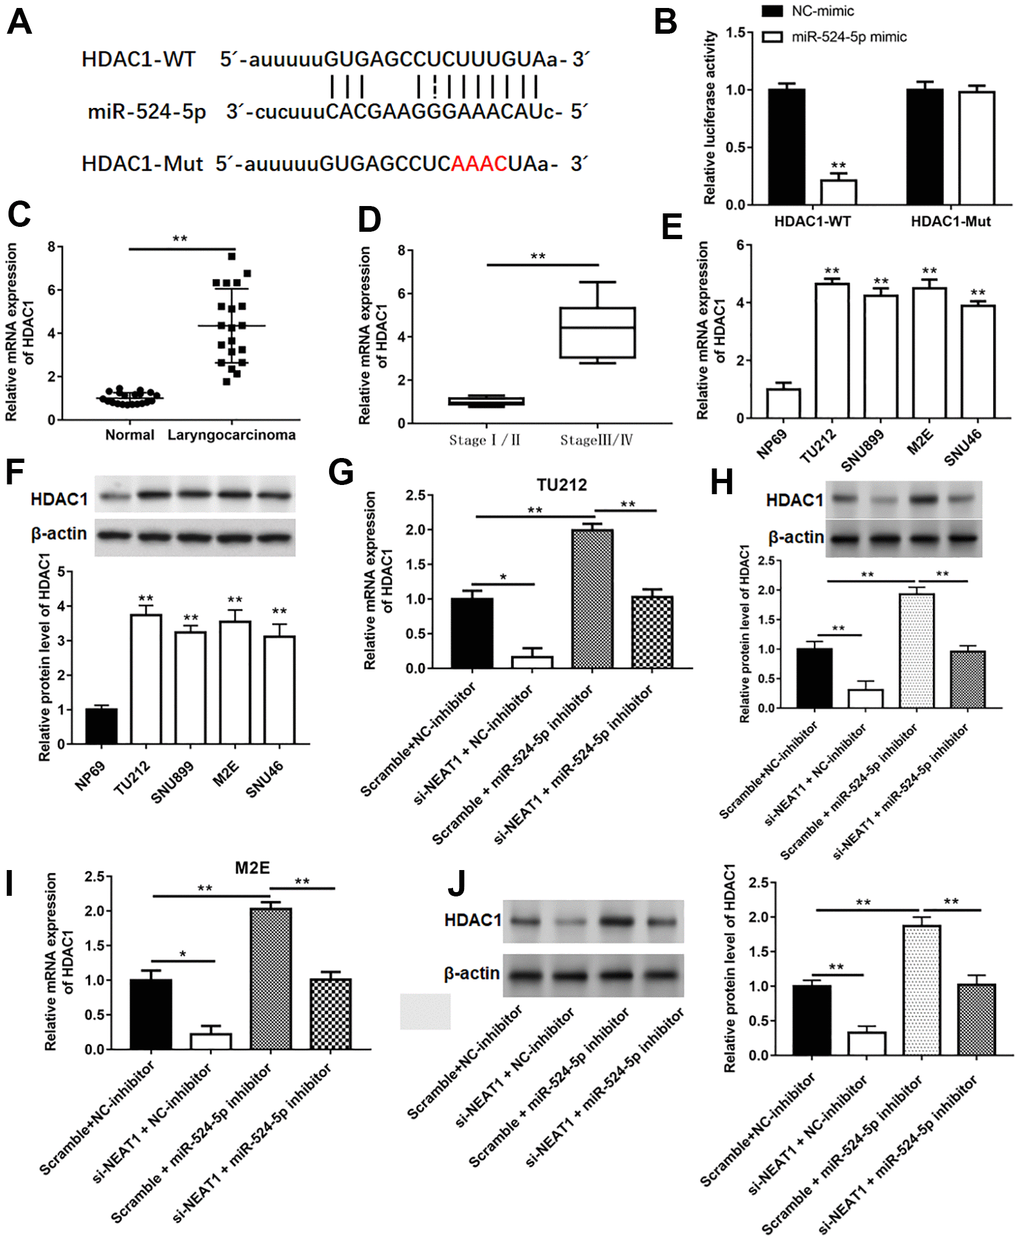 HDAC1 was a target gene of miR-524-5p. (A) The binding sites between miR-524-5p and HDAC1. (B) The relative luciferase activity in HEK-293T cells co-transfected with HDAC1-WT or HDAC1-Mut and with miR-524-5p mimic or NC-mimic. The mRNA levels of HDAC1 in laryngocarcinoma tissues and normal adjacent tissues (n=20) (C), laryngocarcinoma patients with different stage tumor (D) and laryngocarcinoma cell lines (E). (F) The protein expression of HDAC1 in laryngocarcinoma cell lines. (G–J) The mRNA and protein levels were detected with qPCR and Western blotting after TU212 and M2E cells transfected with si-NEAT1 or/and miR-524-5p inhibitor. * P P 